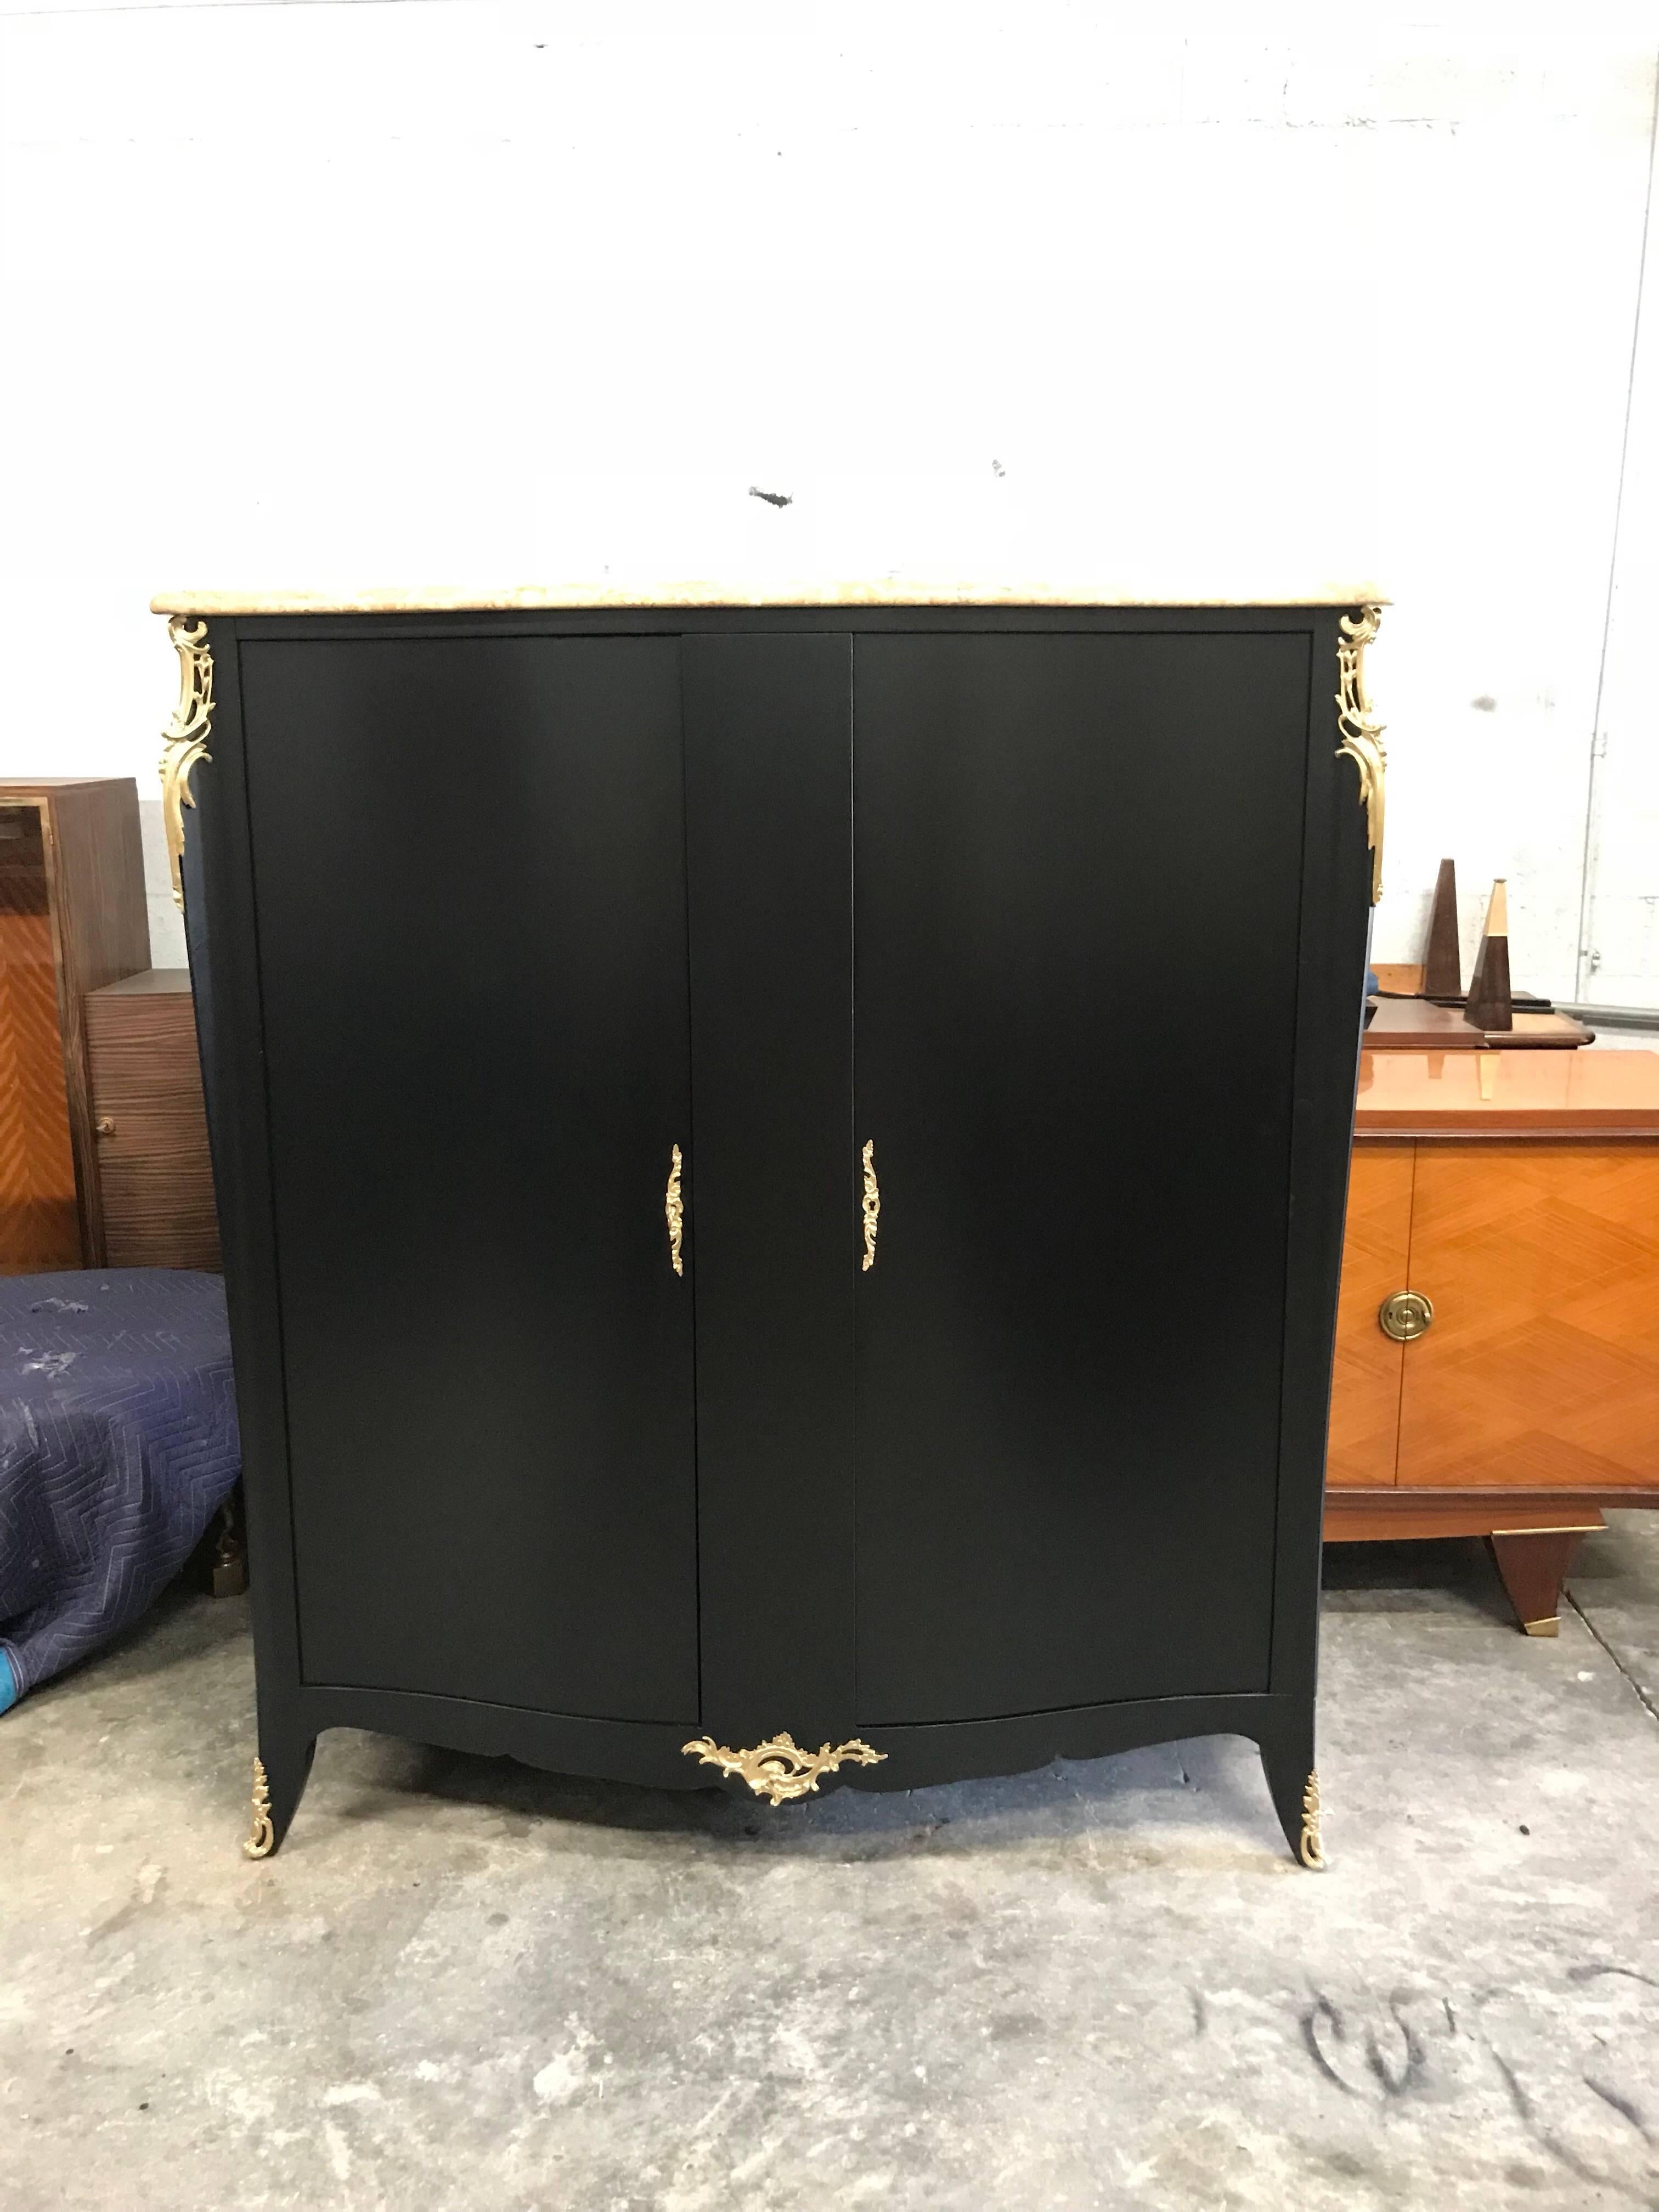 Monumental French Art Deco Ebonized Dry Bar Cabinet with Marble Top, 1940s In Excellent Condition For Sale In Hialeah, FL